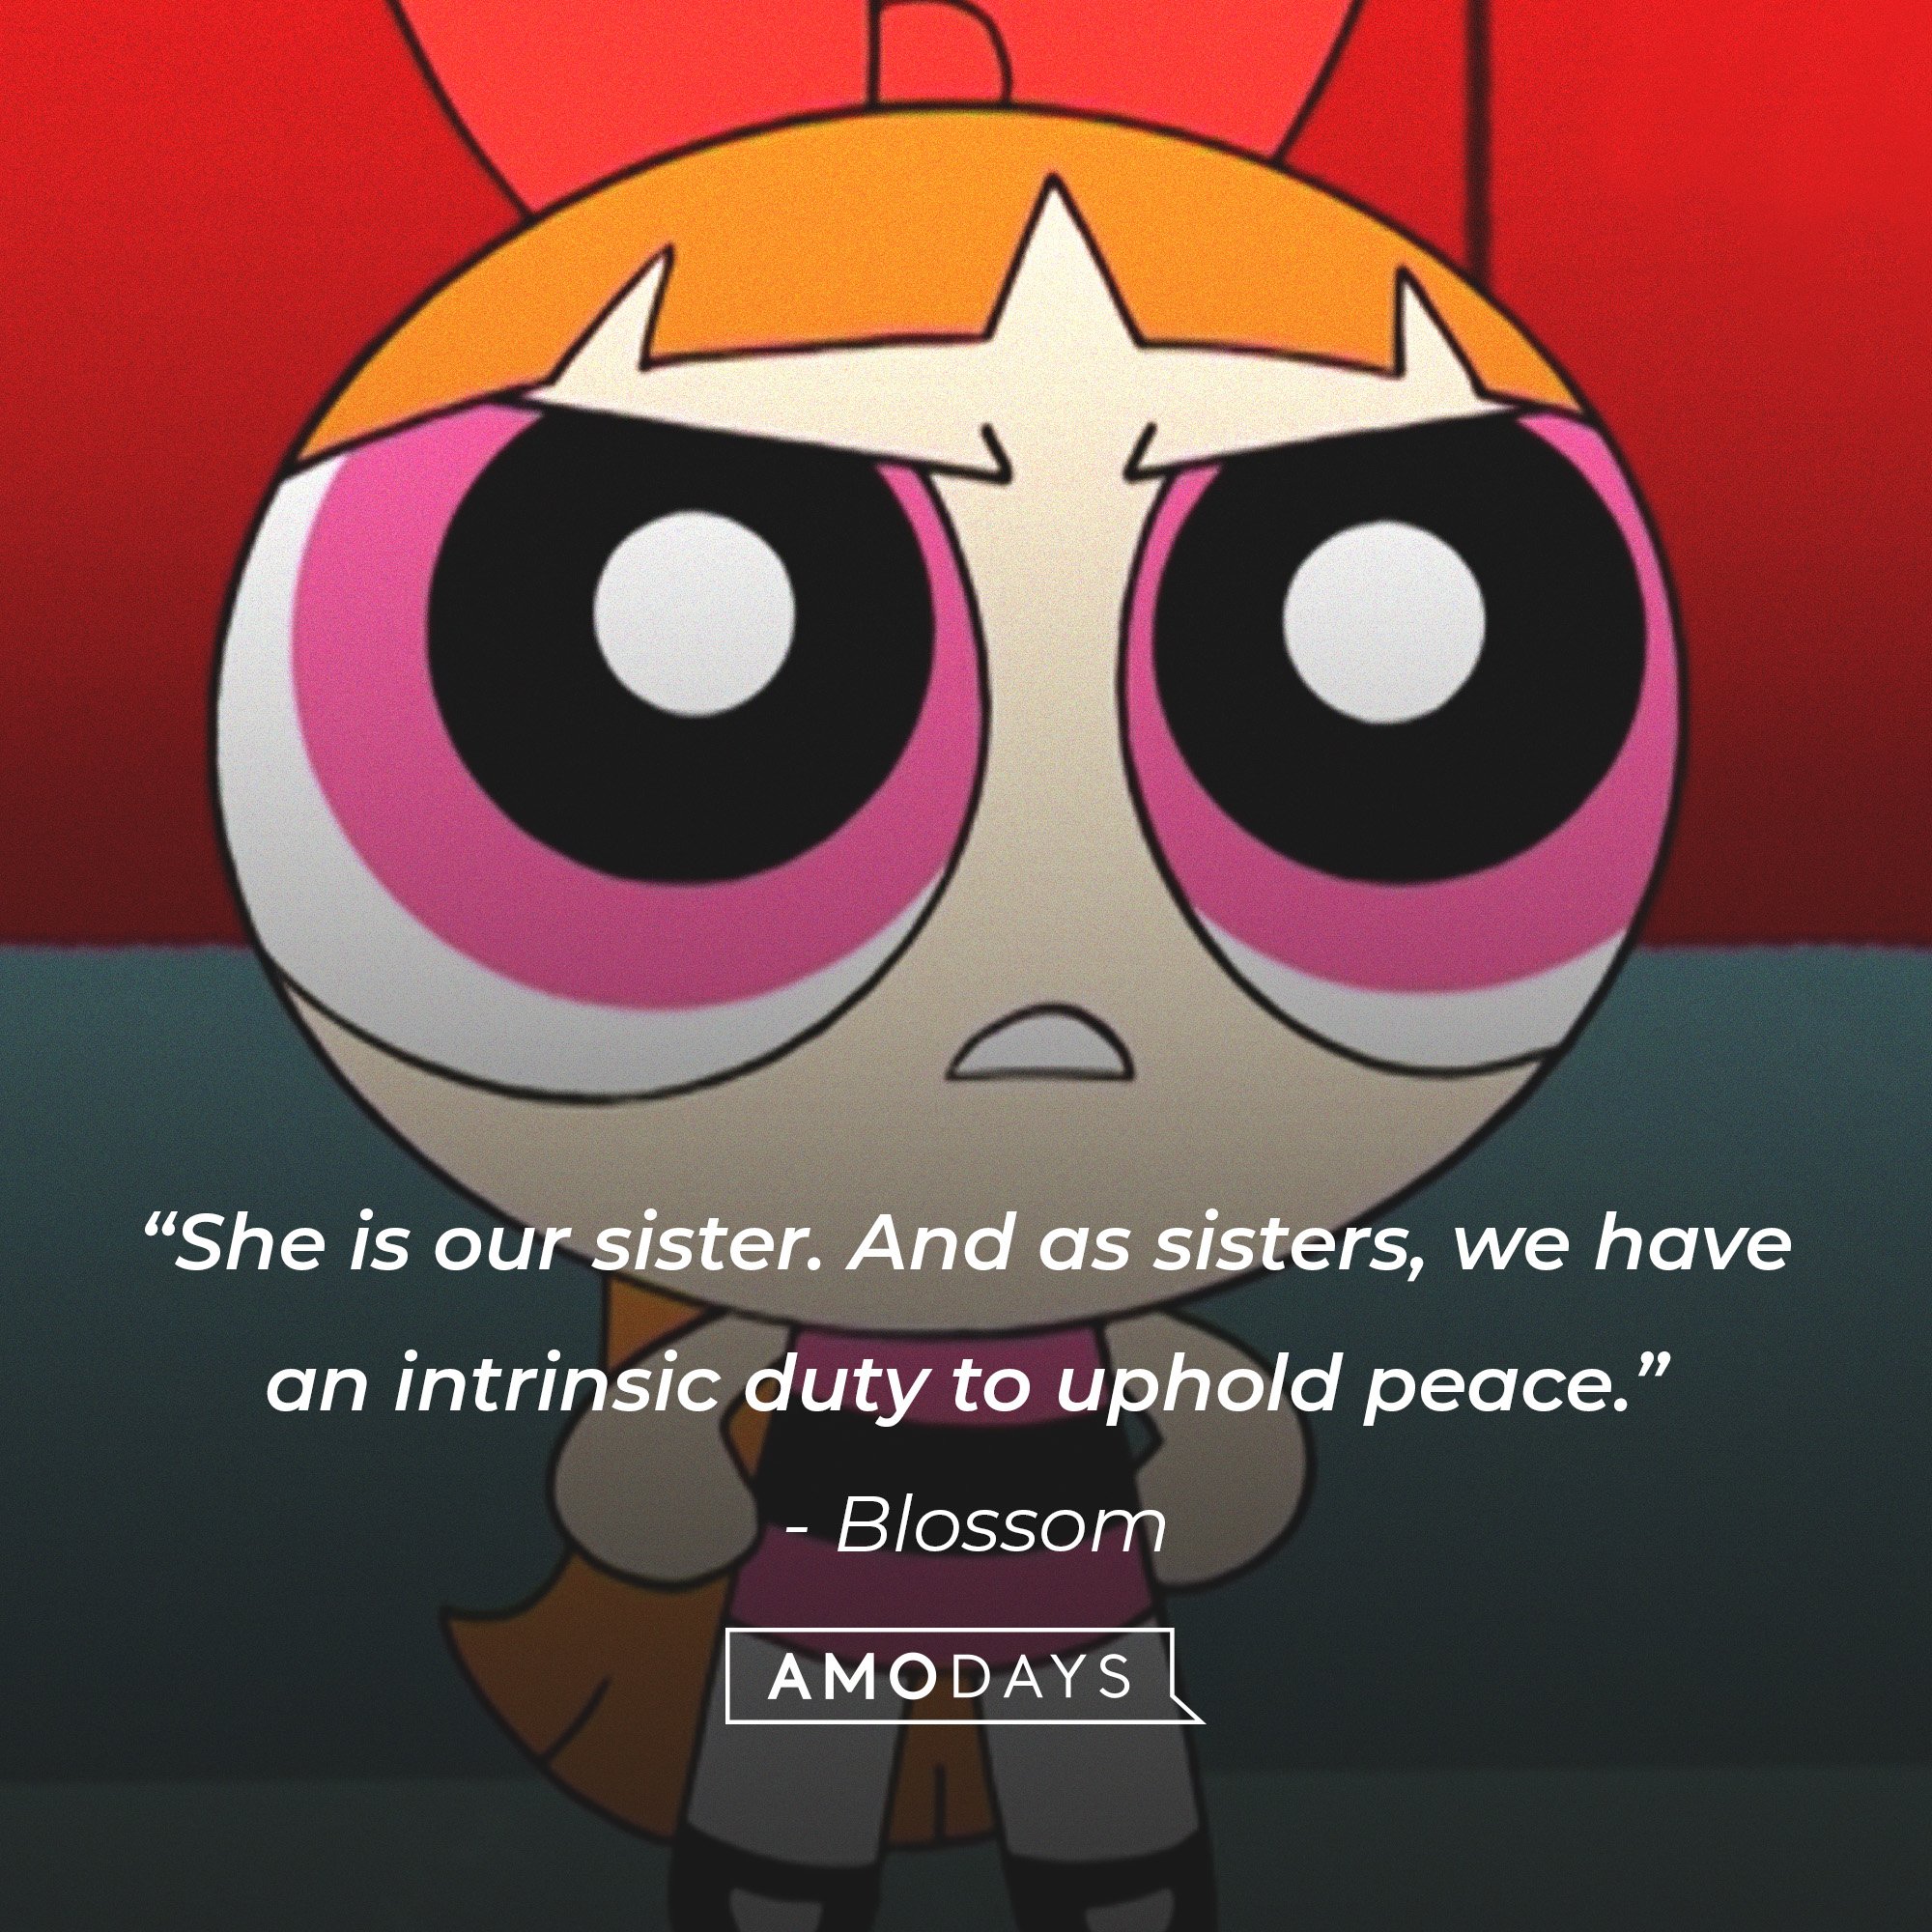 Blossom’s quote: “She is our sister. And as sisters, we have an intrinsic duty to uphold peace.” | Image: AmoDays